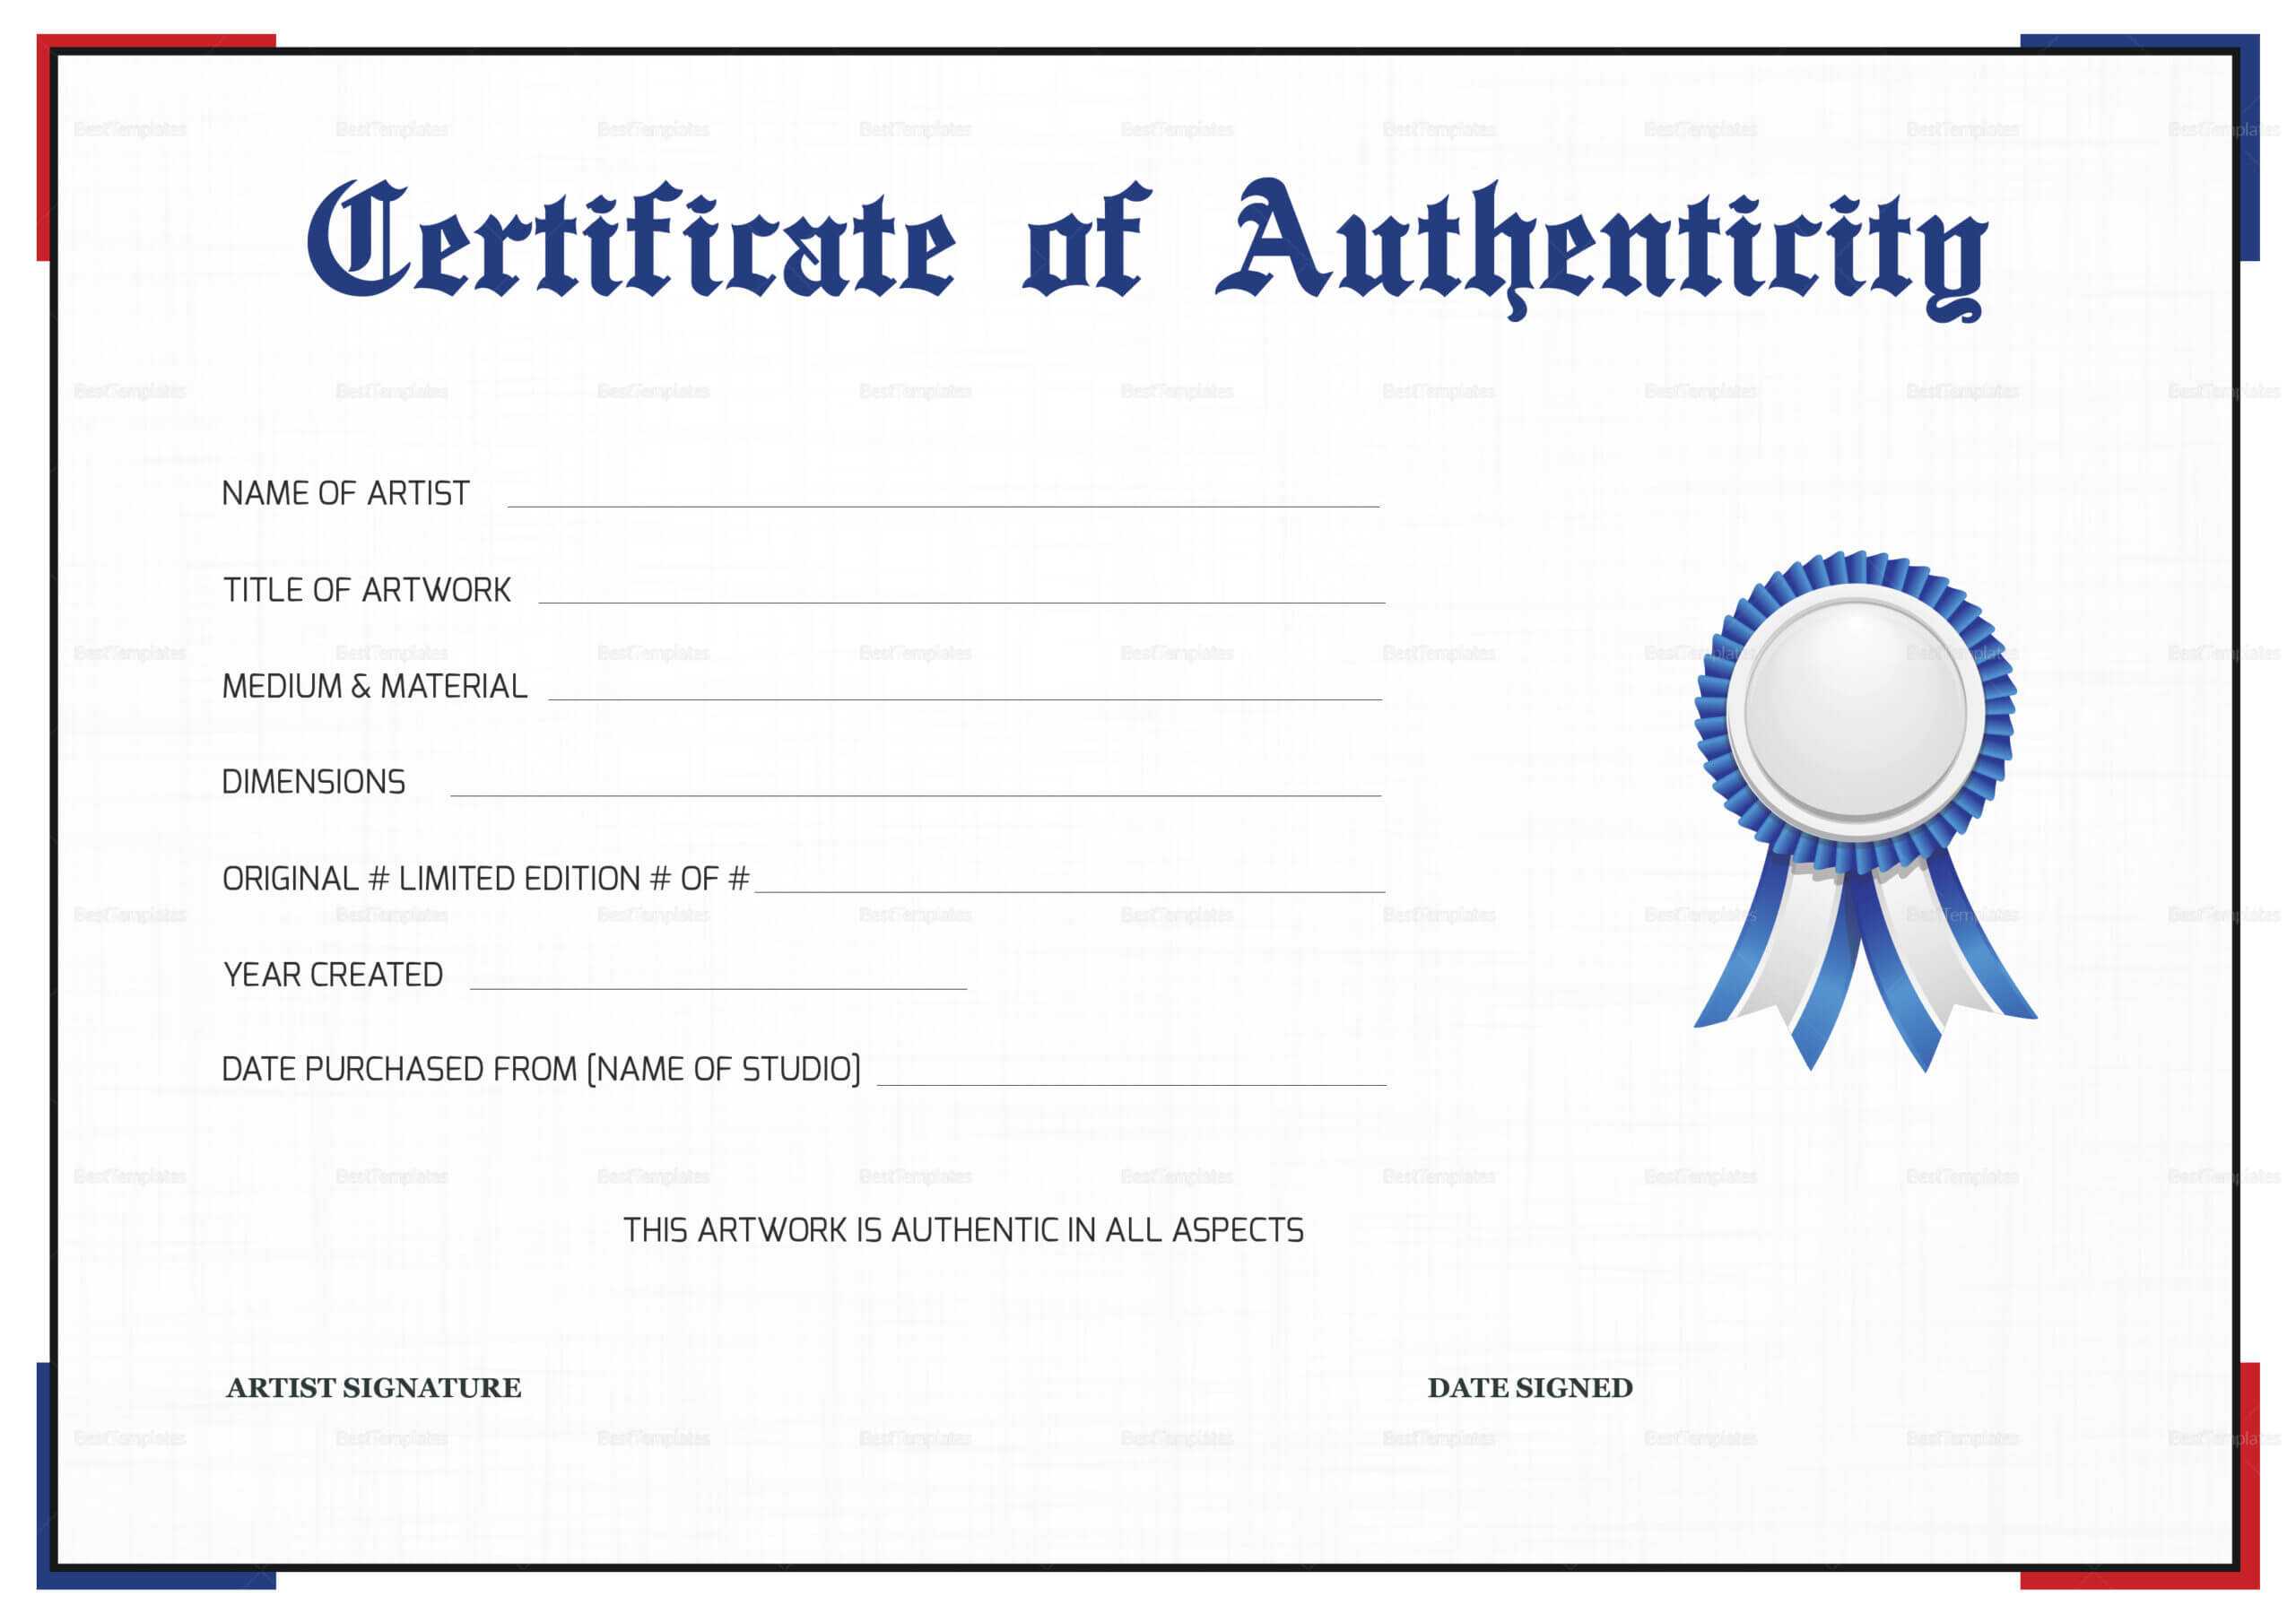 certificate-of-authenticity-full-psd-template-v-1-656501